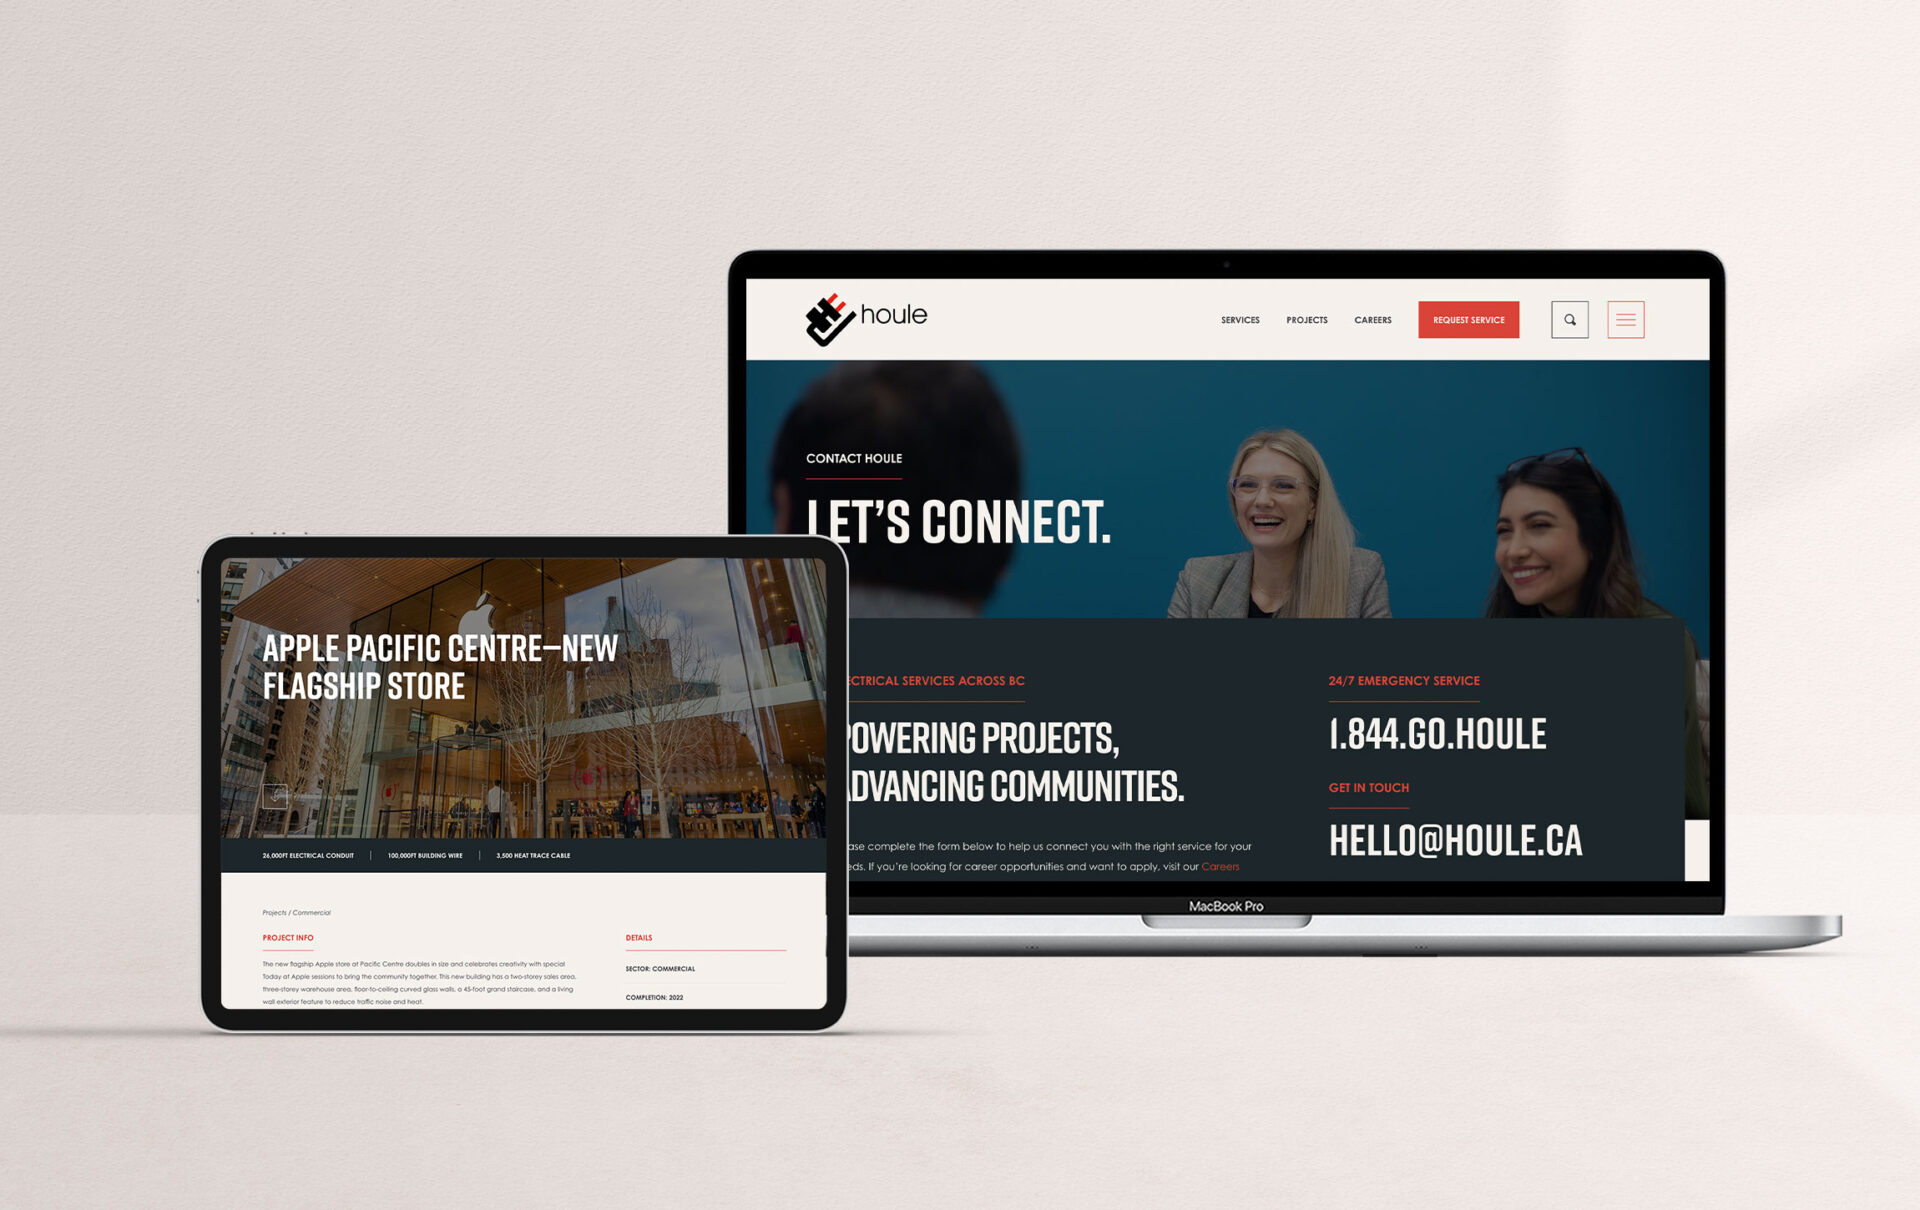 Studiothink is a Vancouver Branding and Web Design Agency